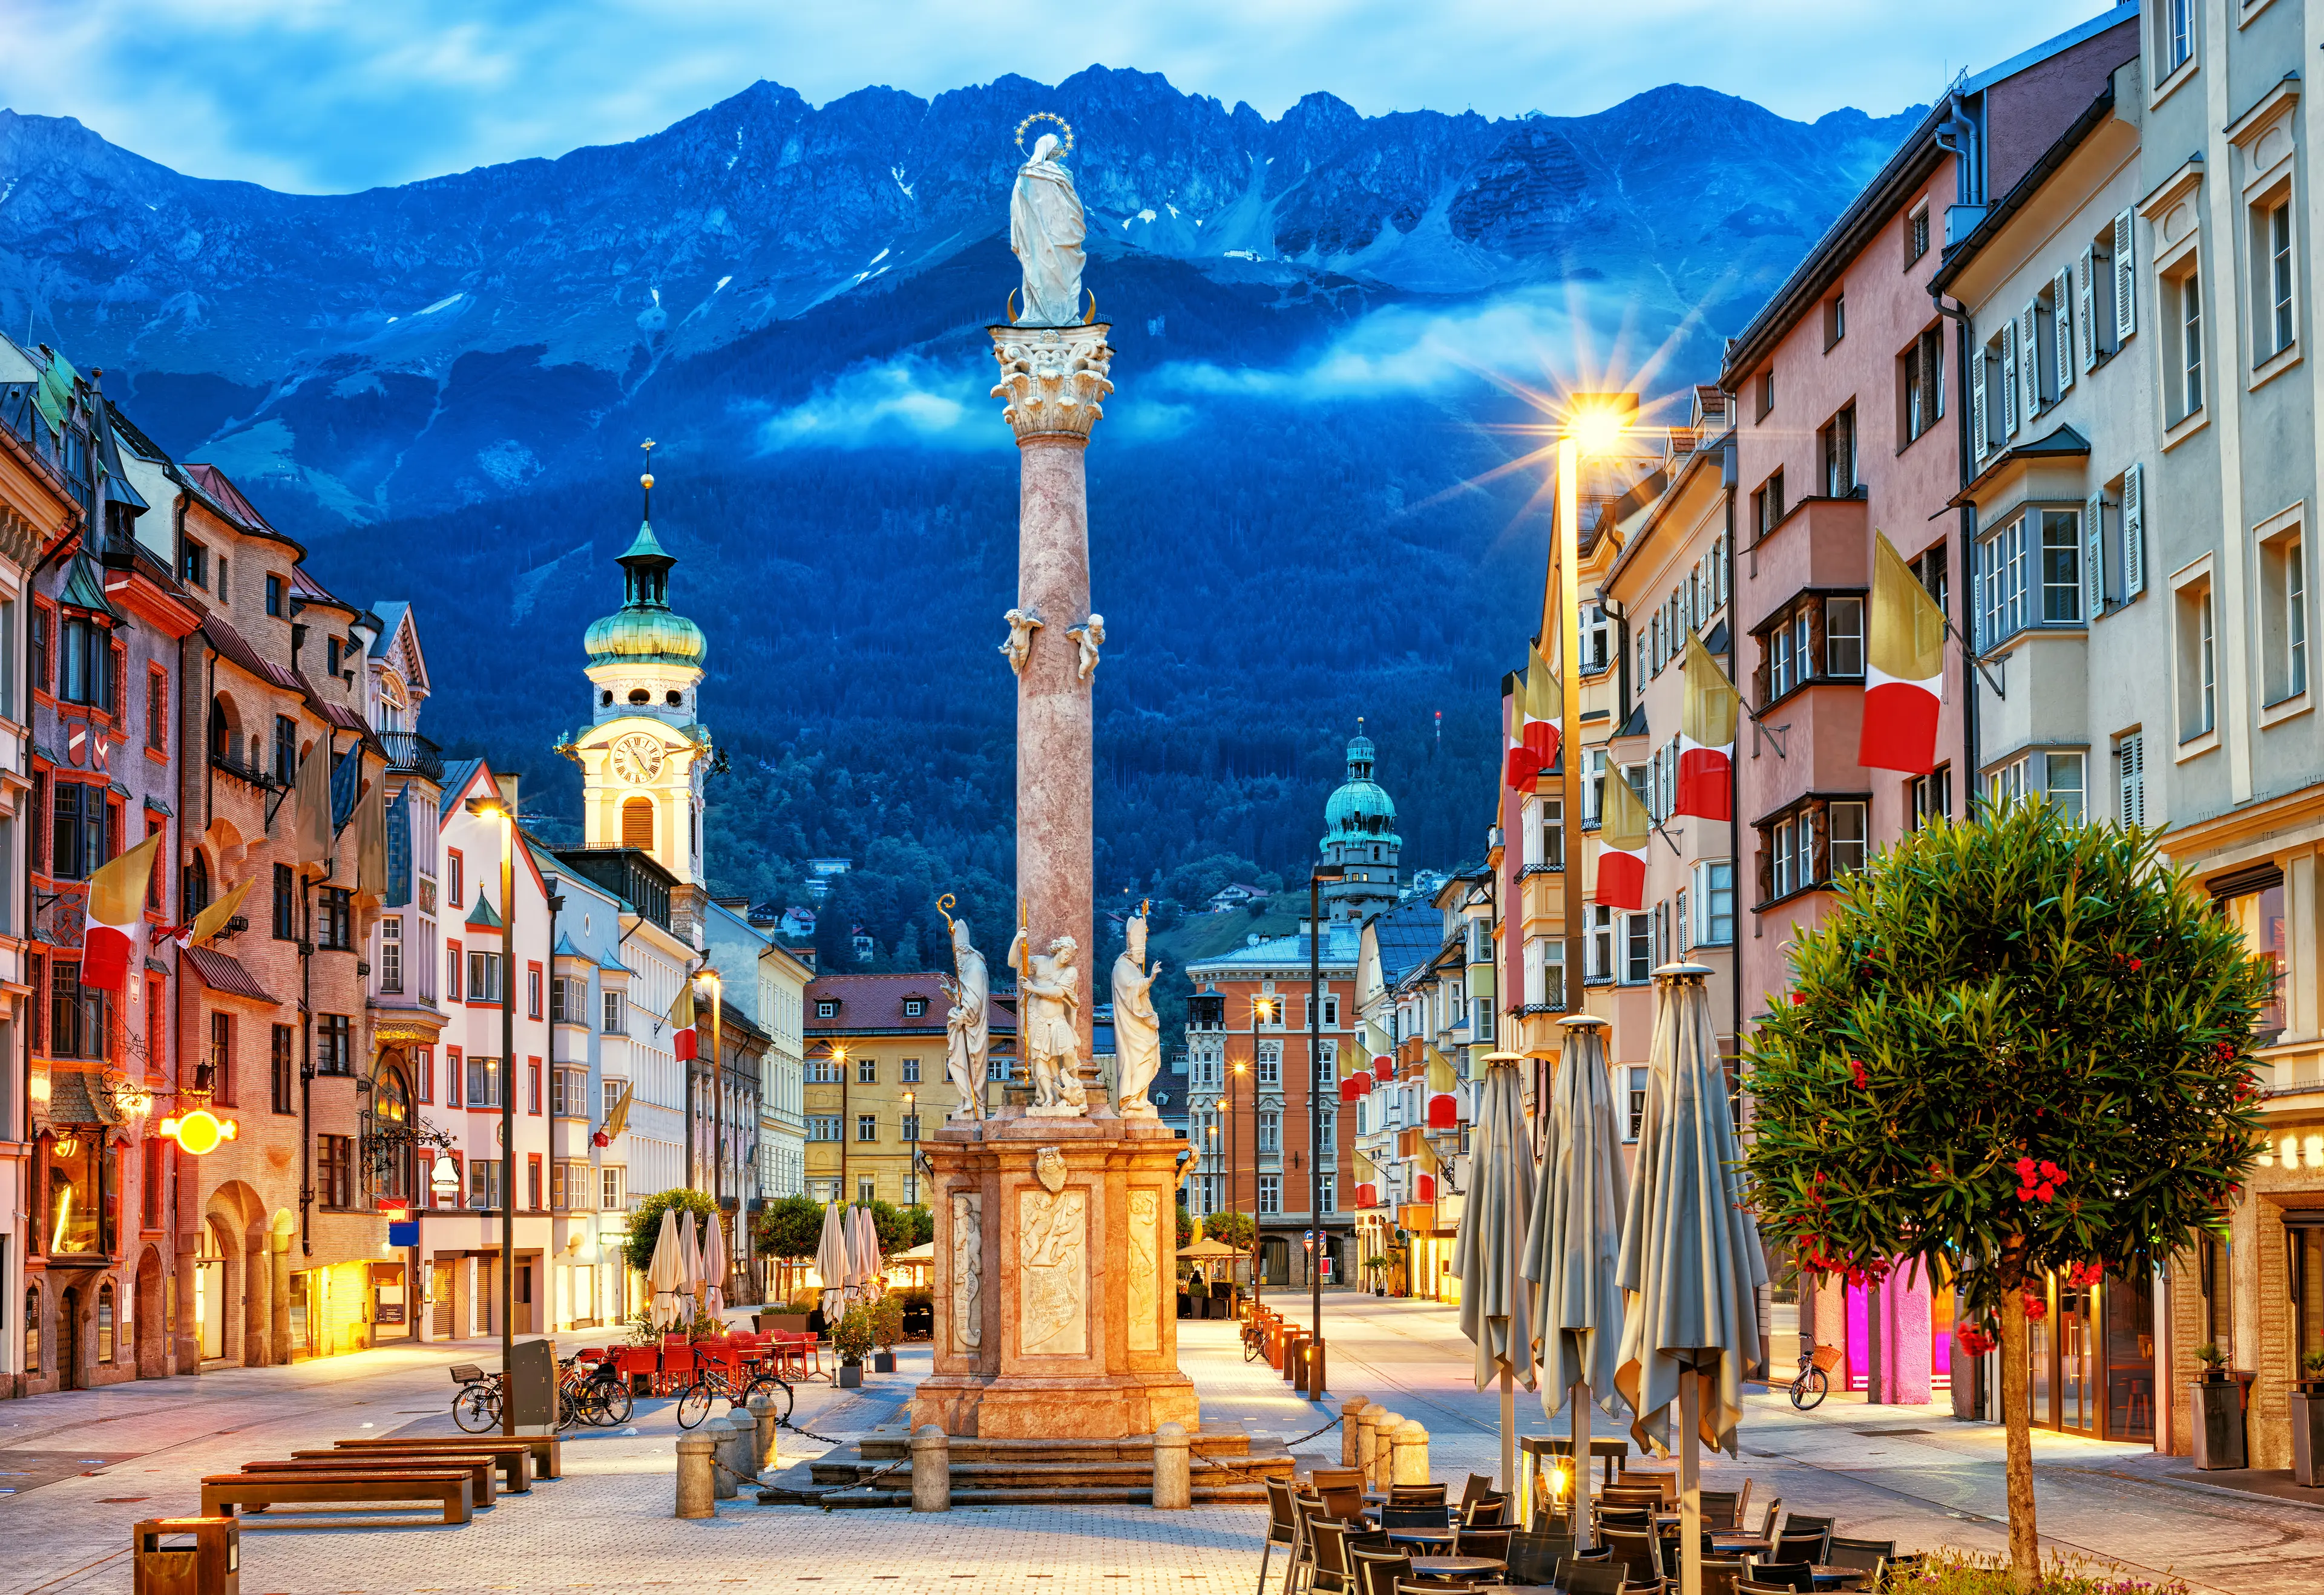 1-Day Innsbruck Adventure: Sightseeing and Nightlife with Friends